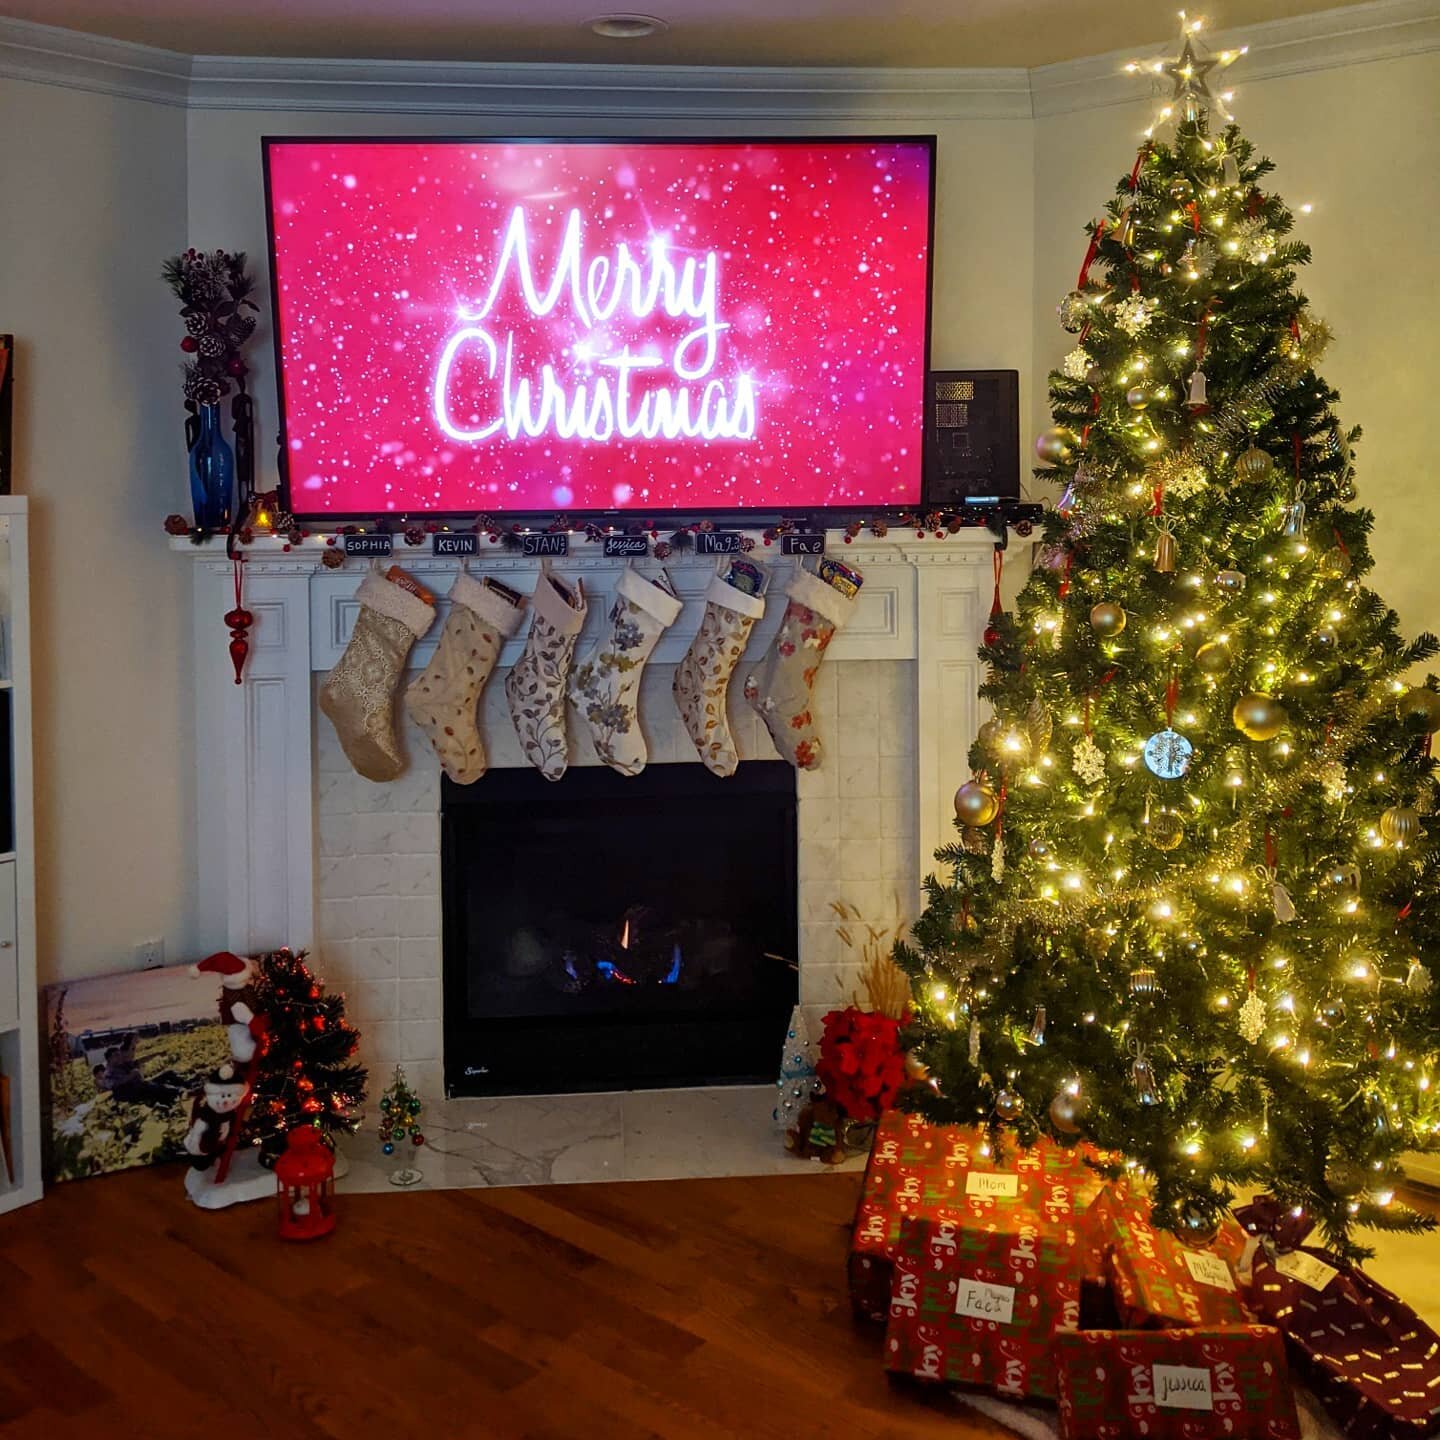 My first Christmas after being abroad for 4 years was also the first Christmas my family ever celebrated together at home. It was the first time we ever got a tree, lights, ornaments, stockings and exchanged gifts. Though the tradition seemed forced 